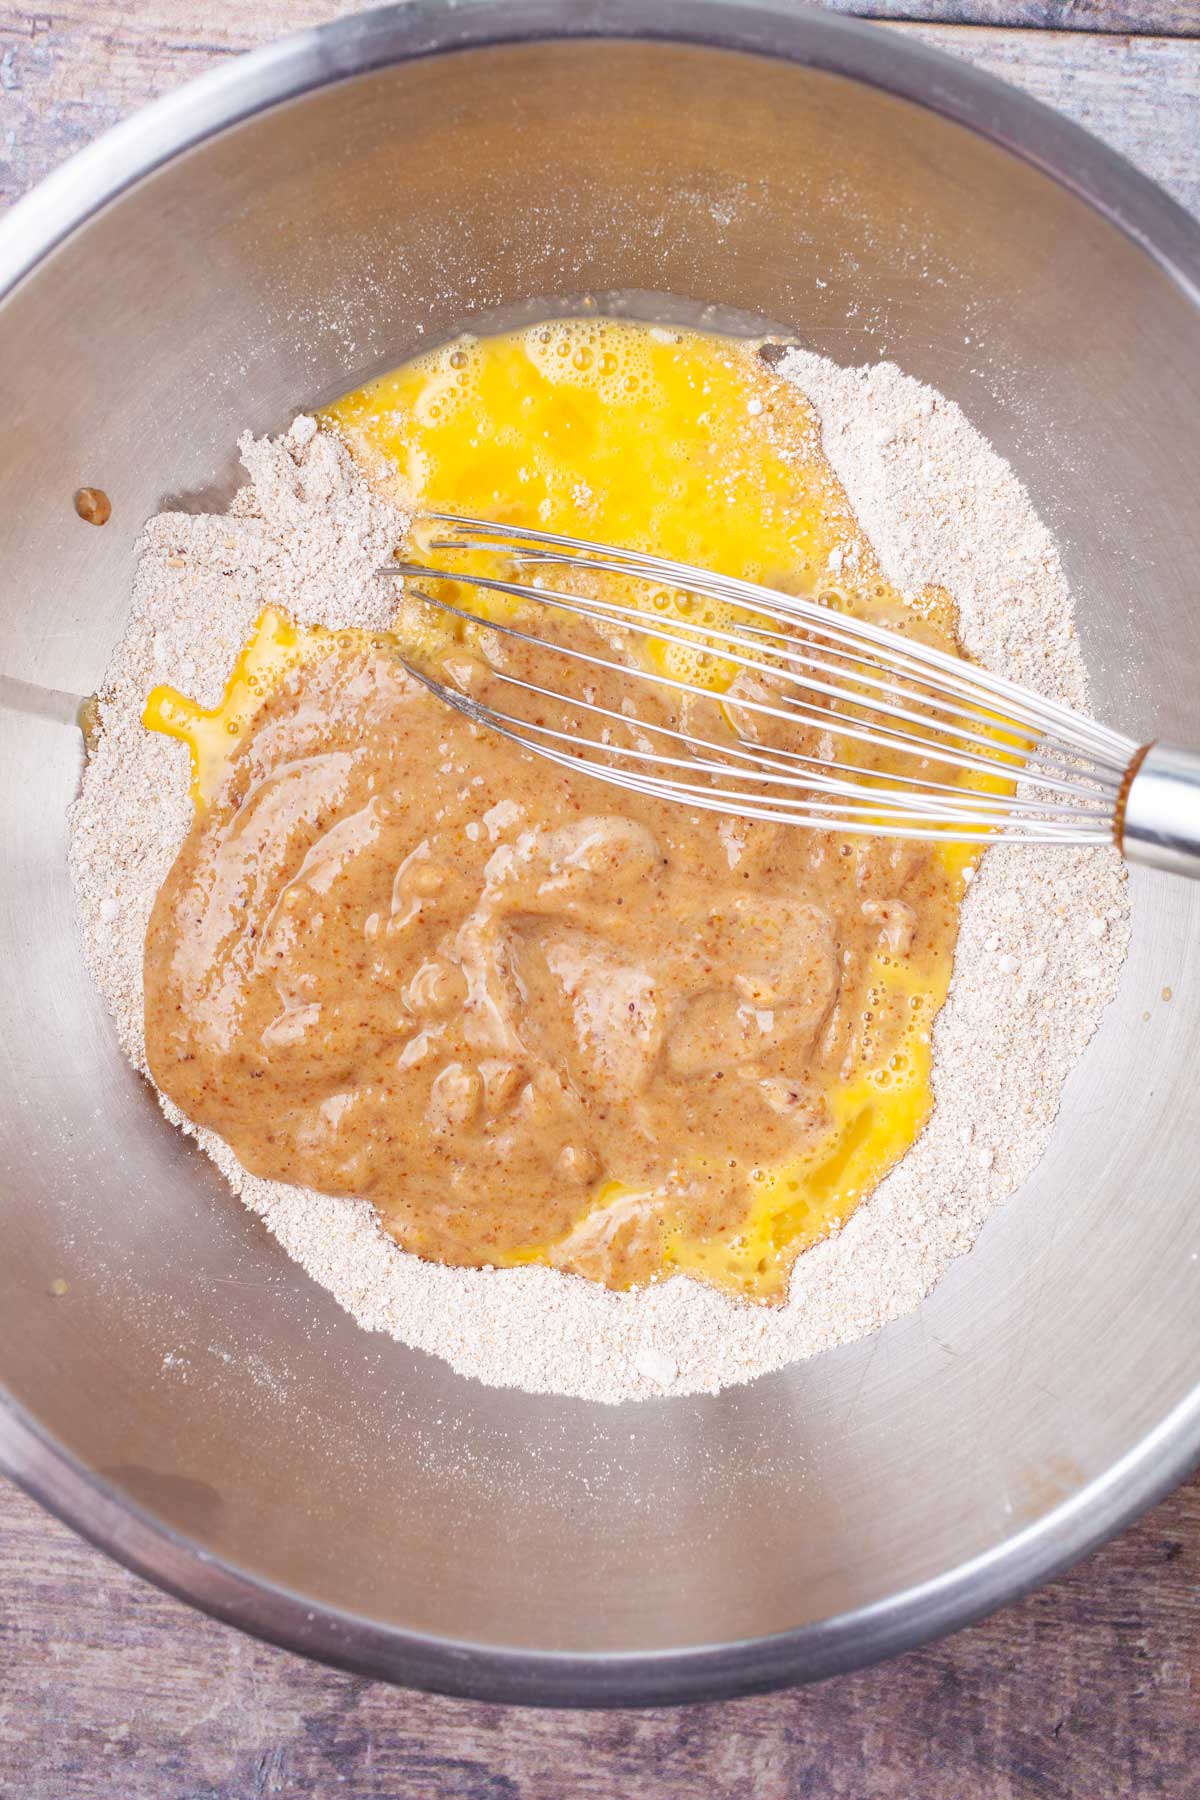 Flour, beaten eggs, and fruit puree in a stainless steel bowl with a whisk.